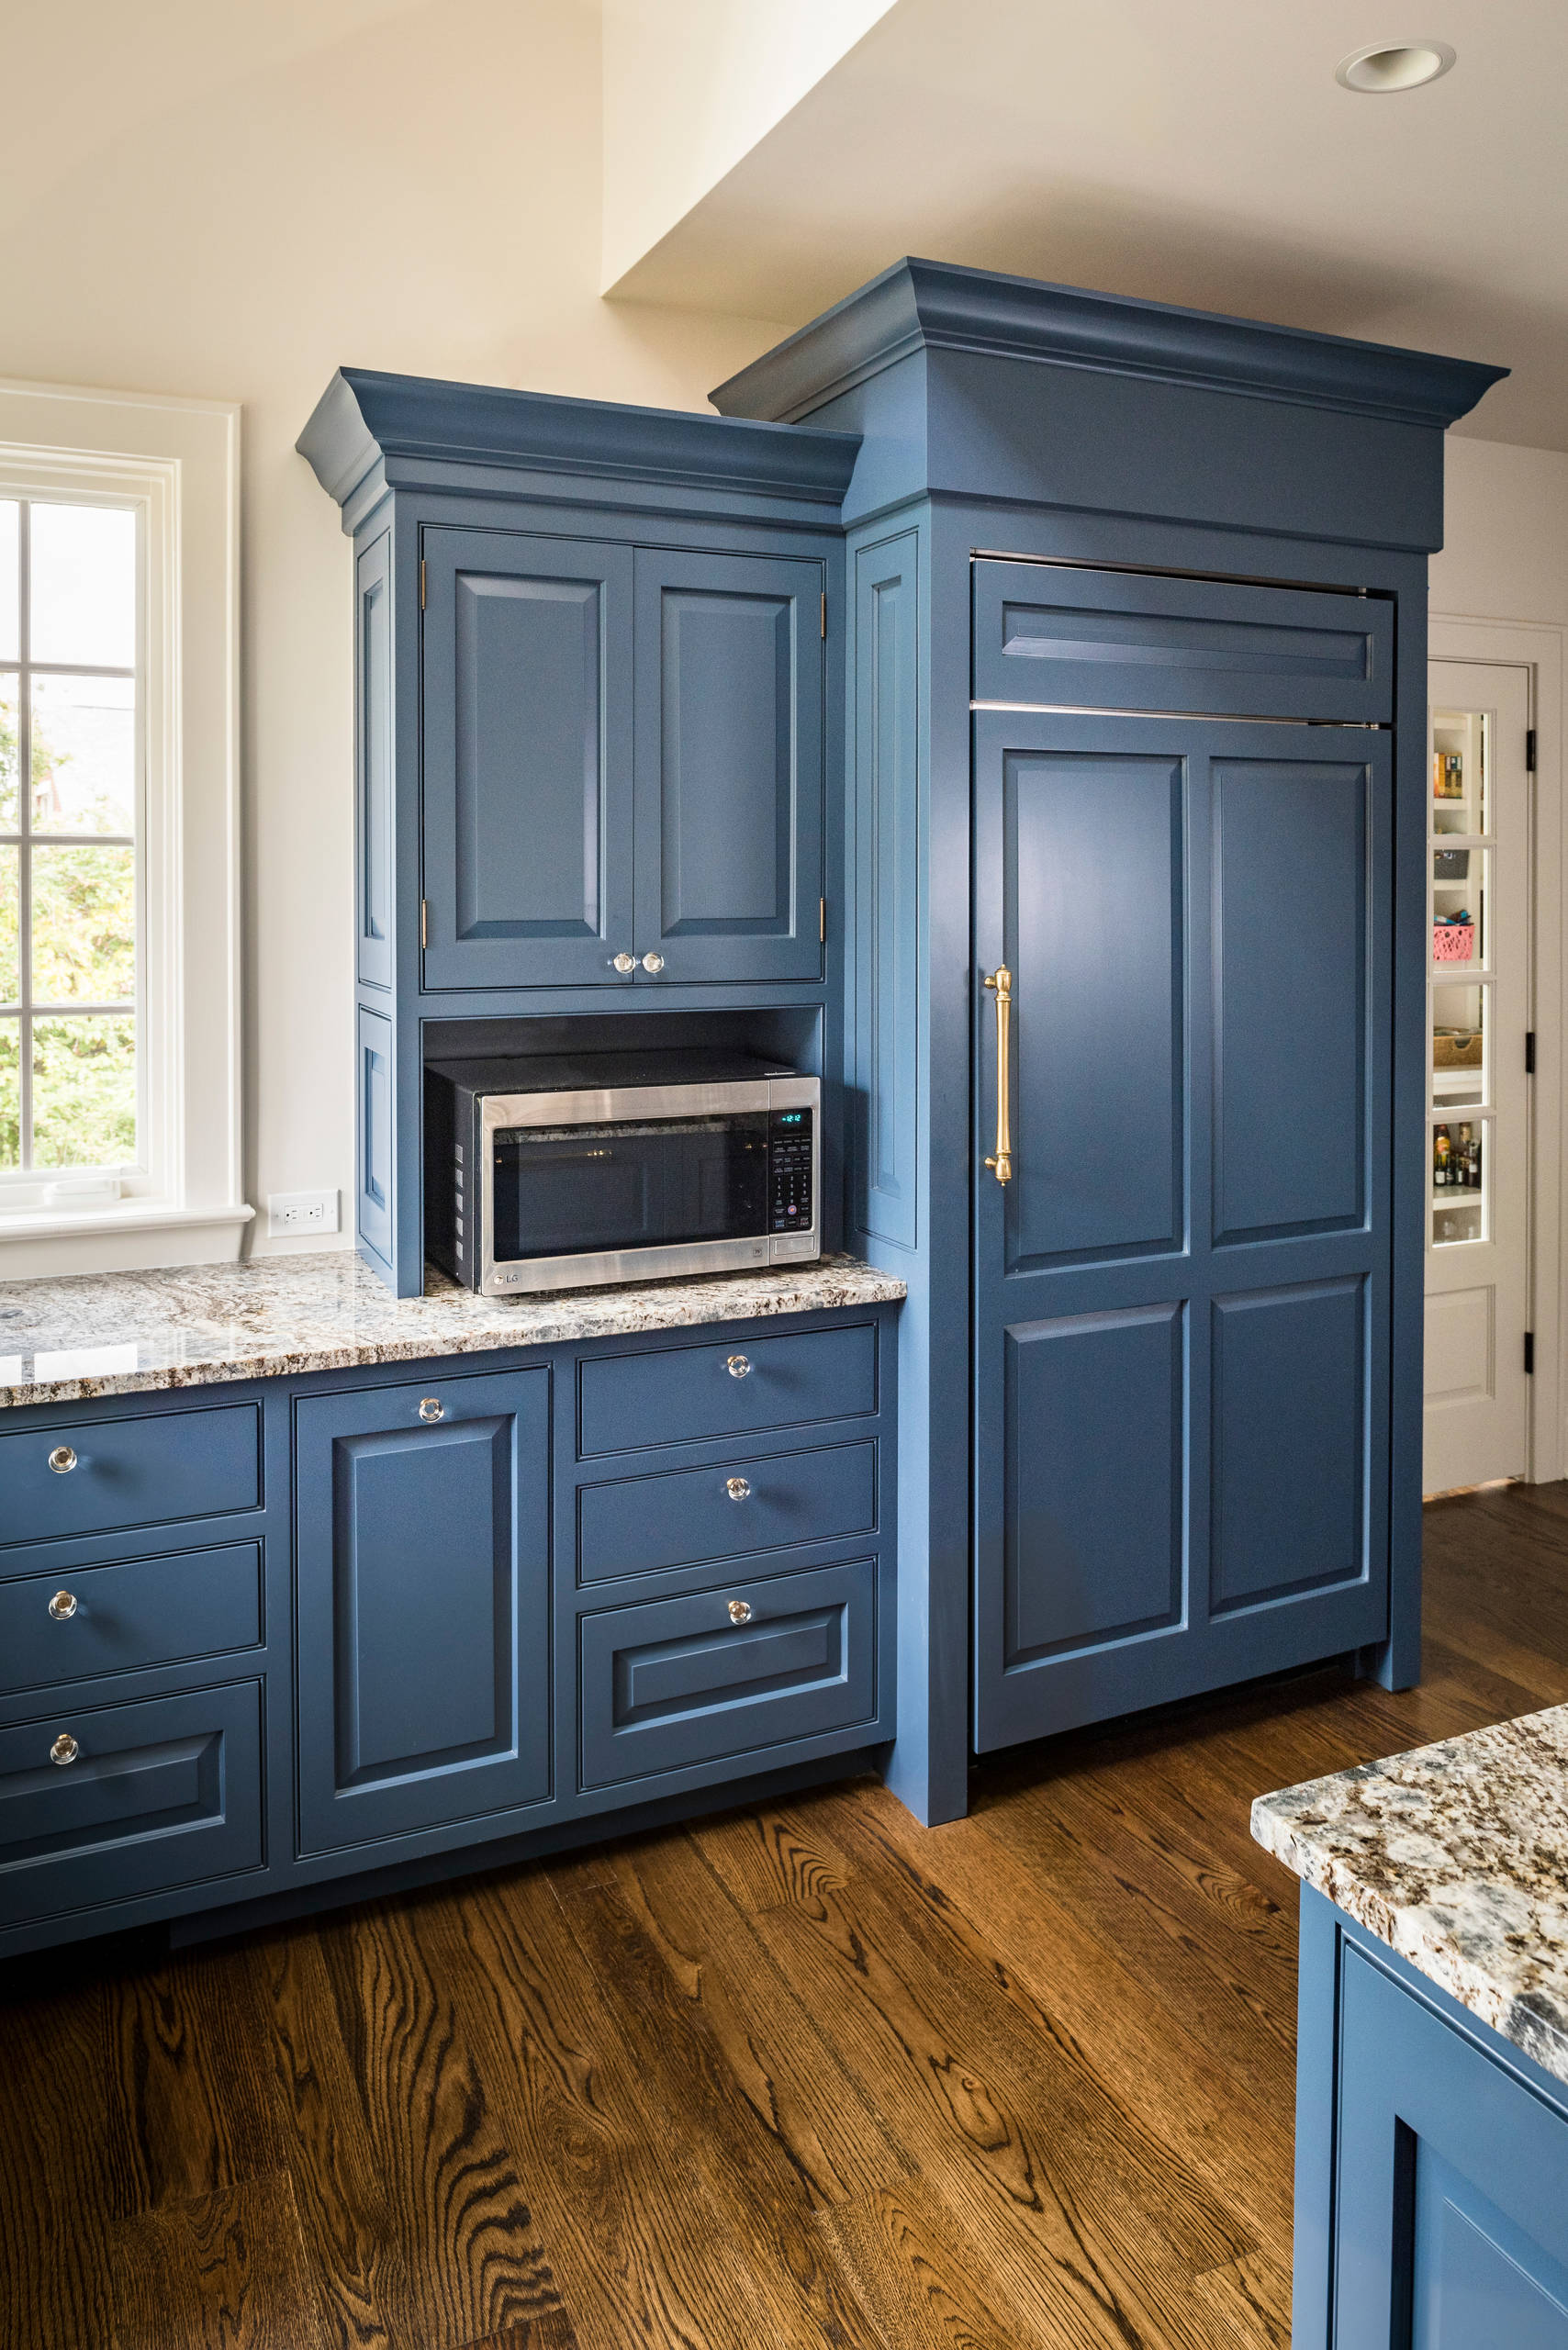 French Blue by Don Justice Cabinet Makers